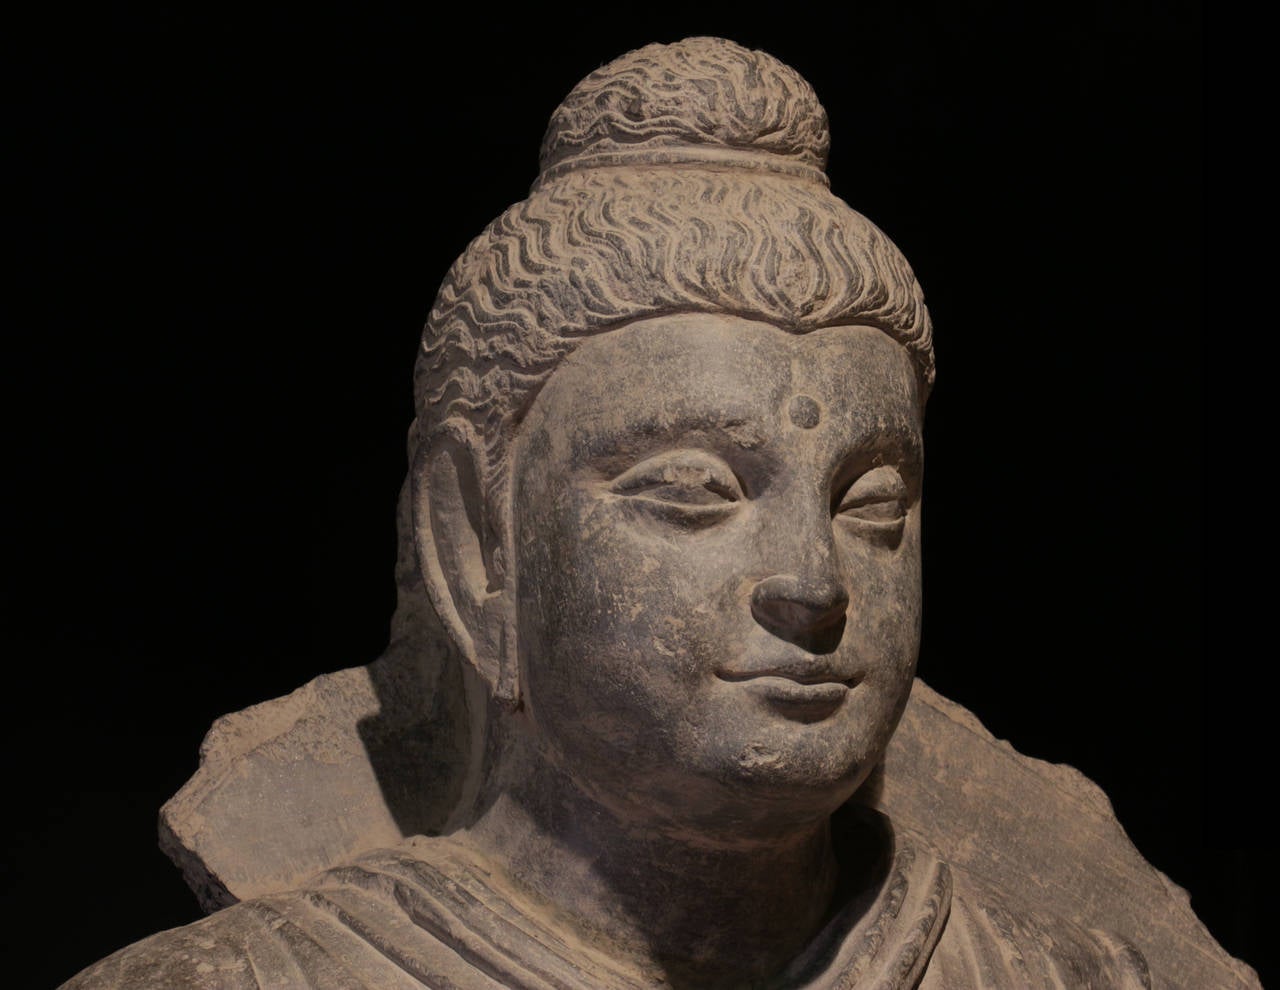 Exceptional 1700 Year Old, Lifesize, Museum Quality Stone Buddha Sculpture In Good Condition For Sale In Hudson, NY